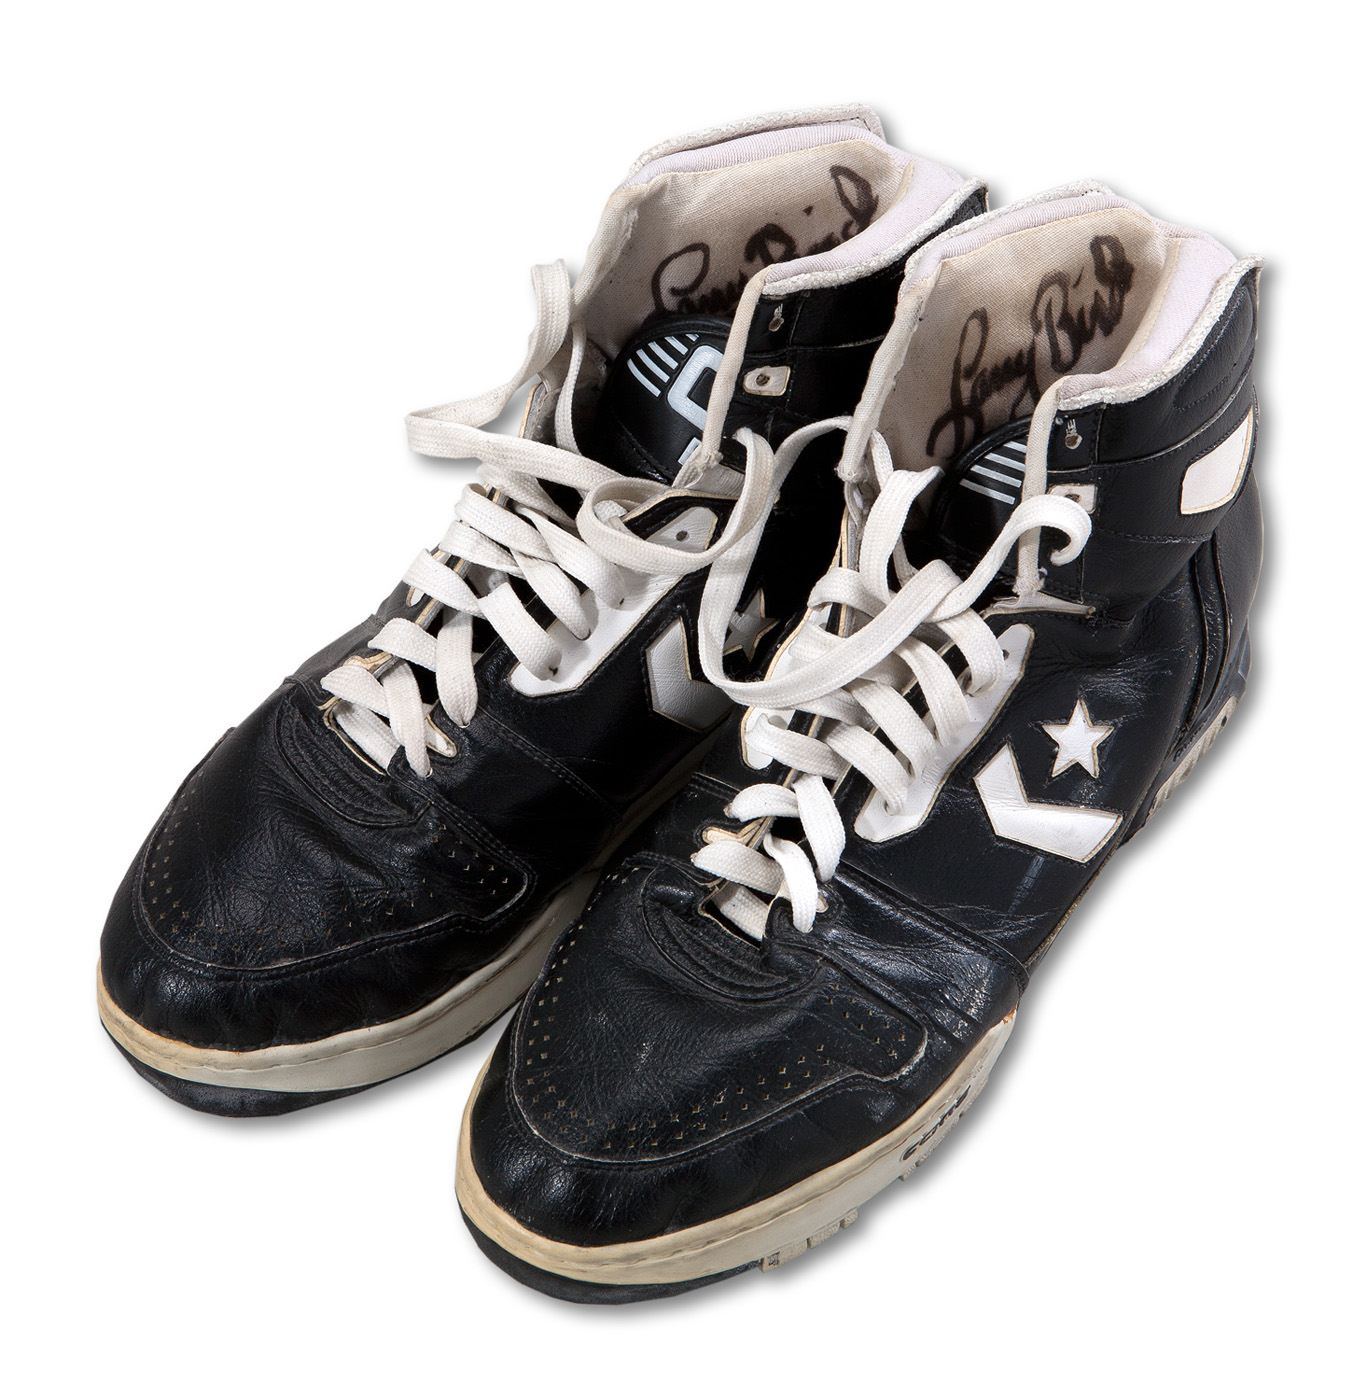 Detail LARRY 1989-90 AUTOGRAPHED GAME WORN CONVERSE SNEAKERS